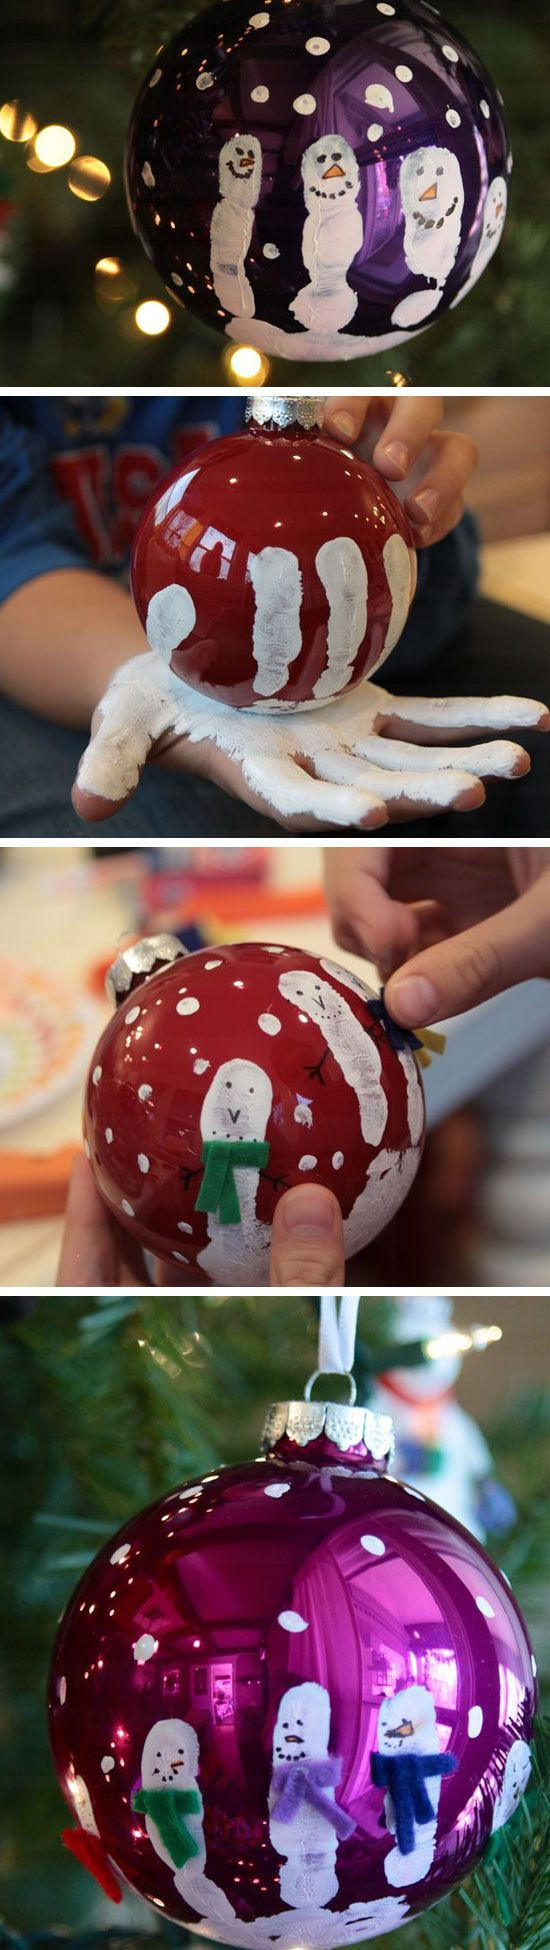 DIY Christmas Craft For Kids
 Easy and Cute DIY Christmas Crafts for Kids to Make Hative